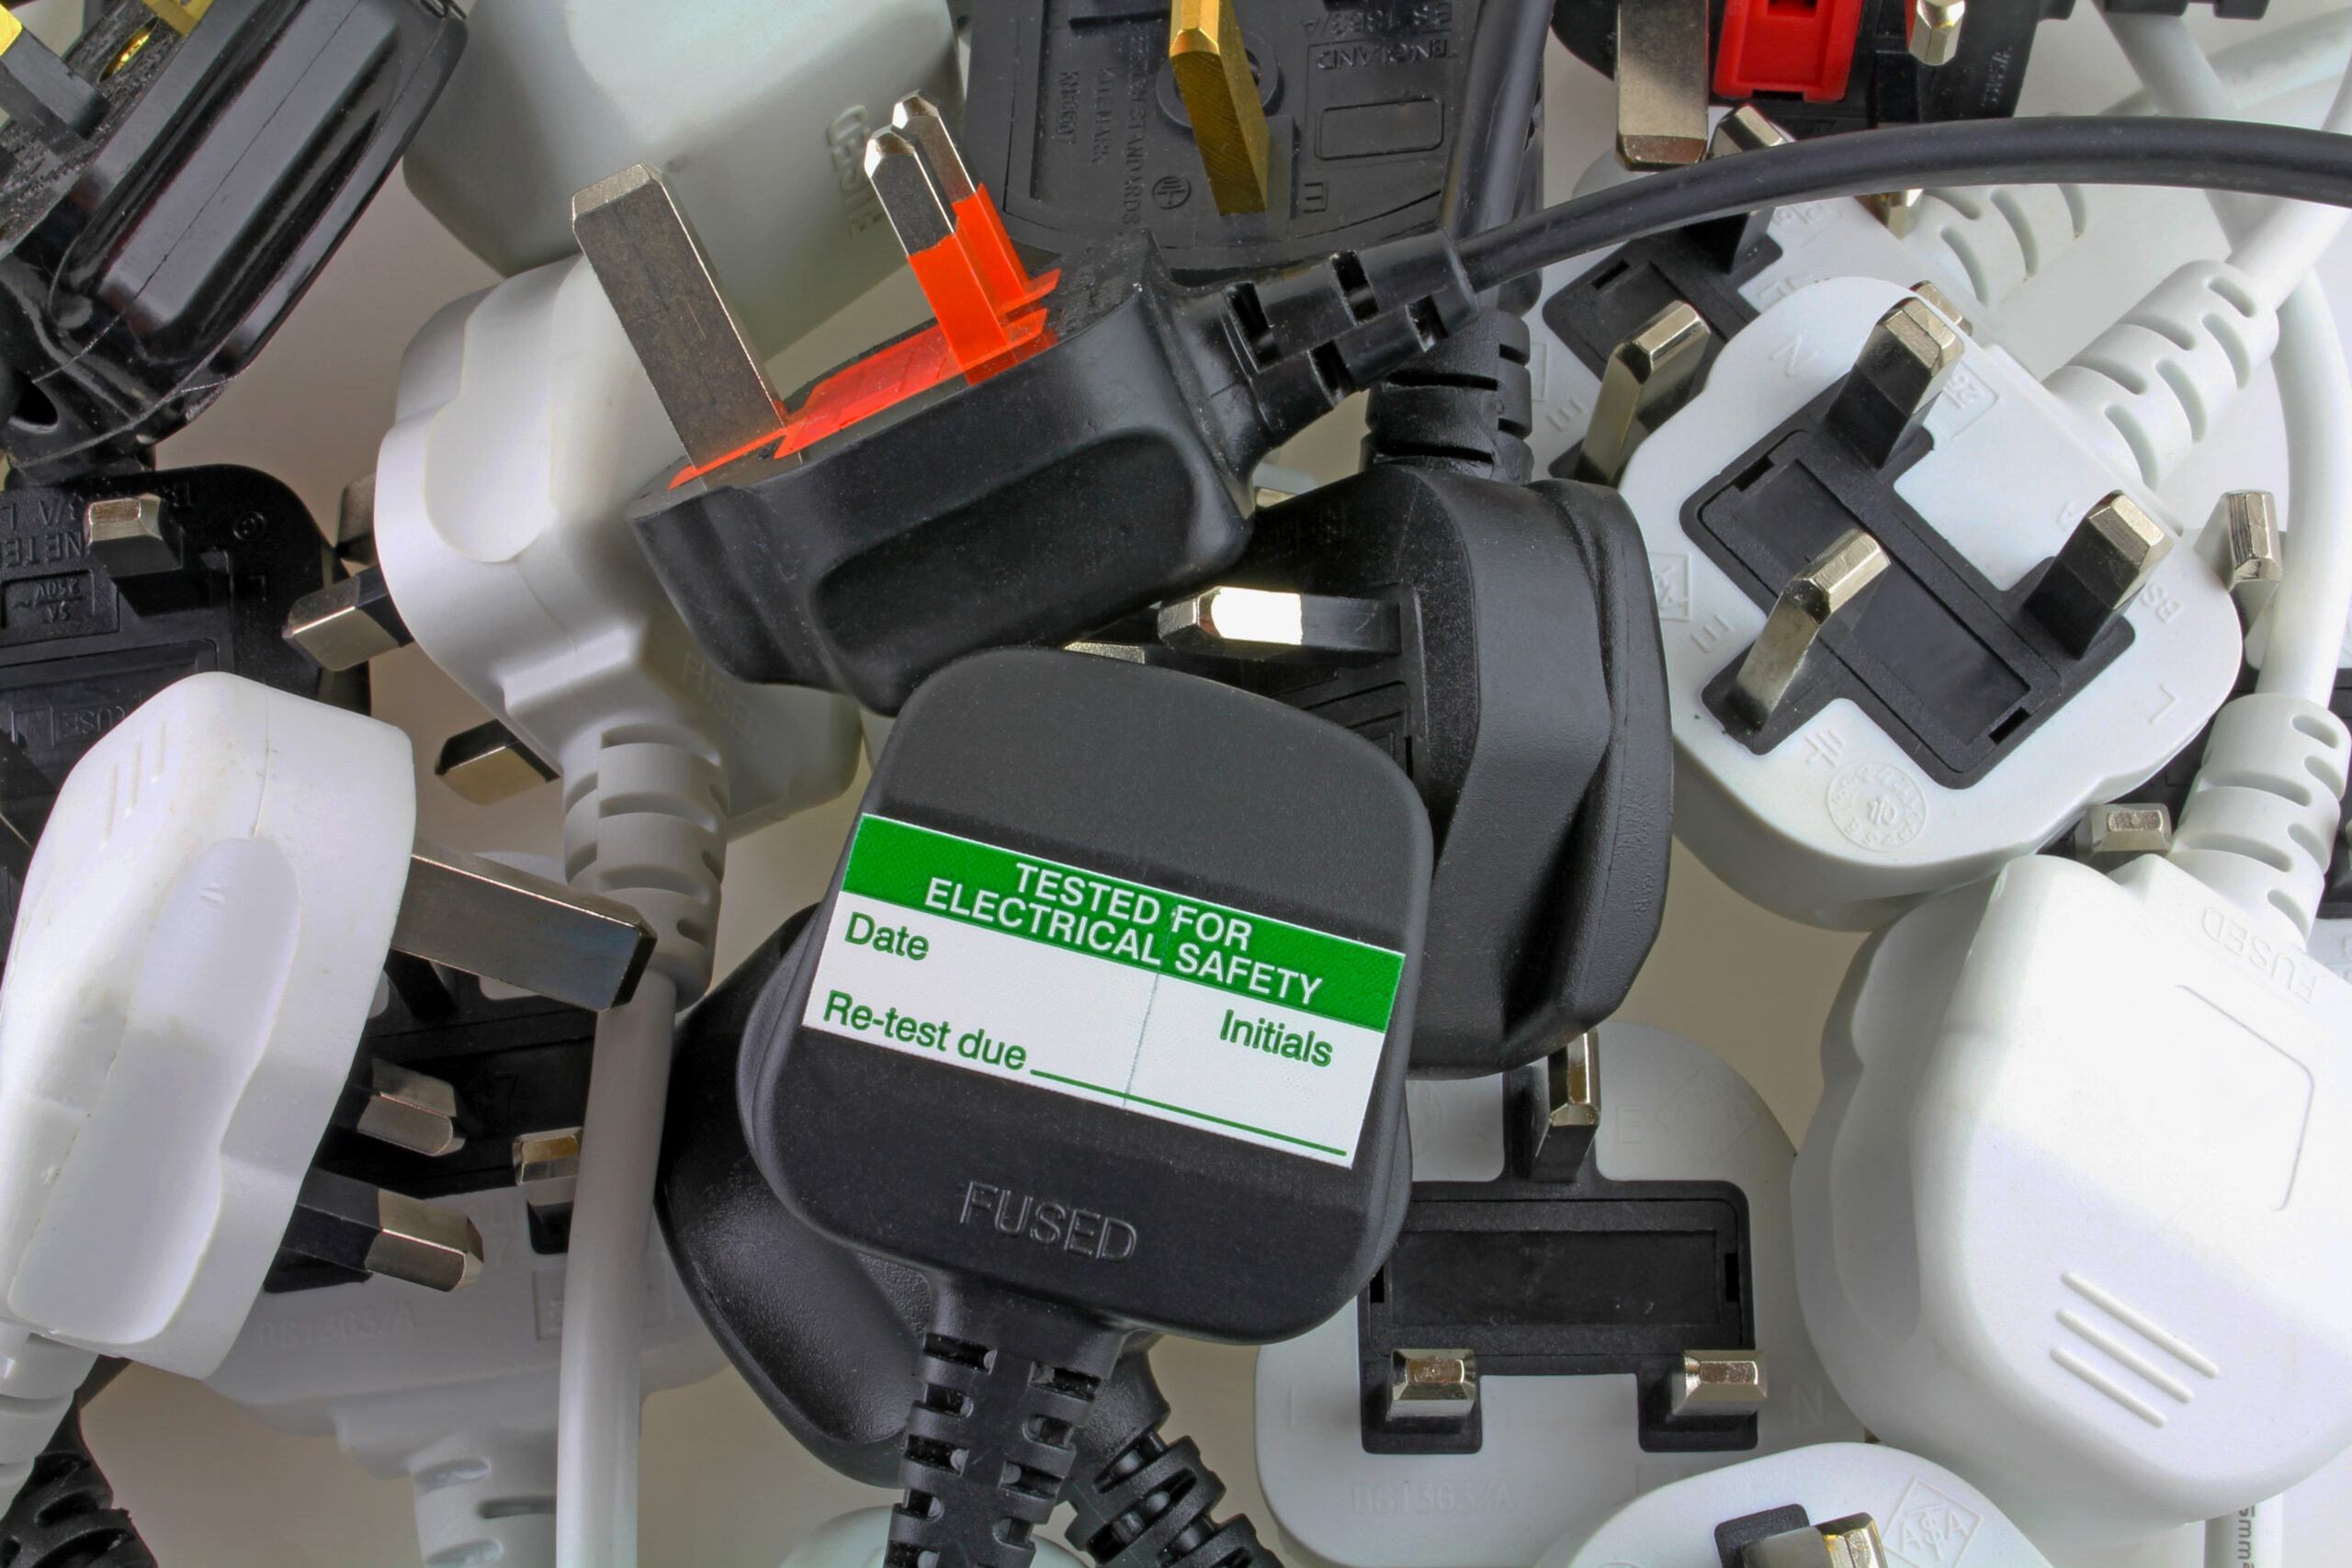 Blank Pat Testing Label on plug with several more plugs in a pile.